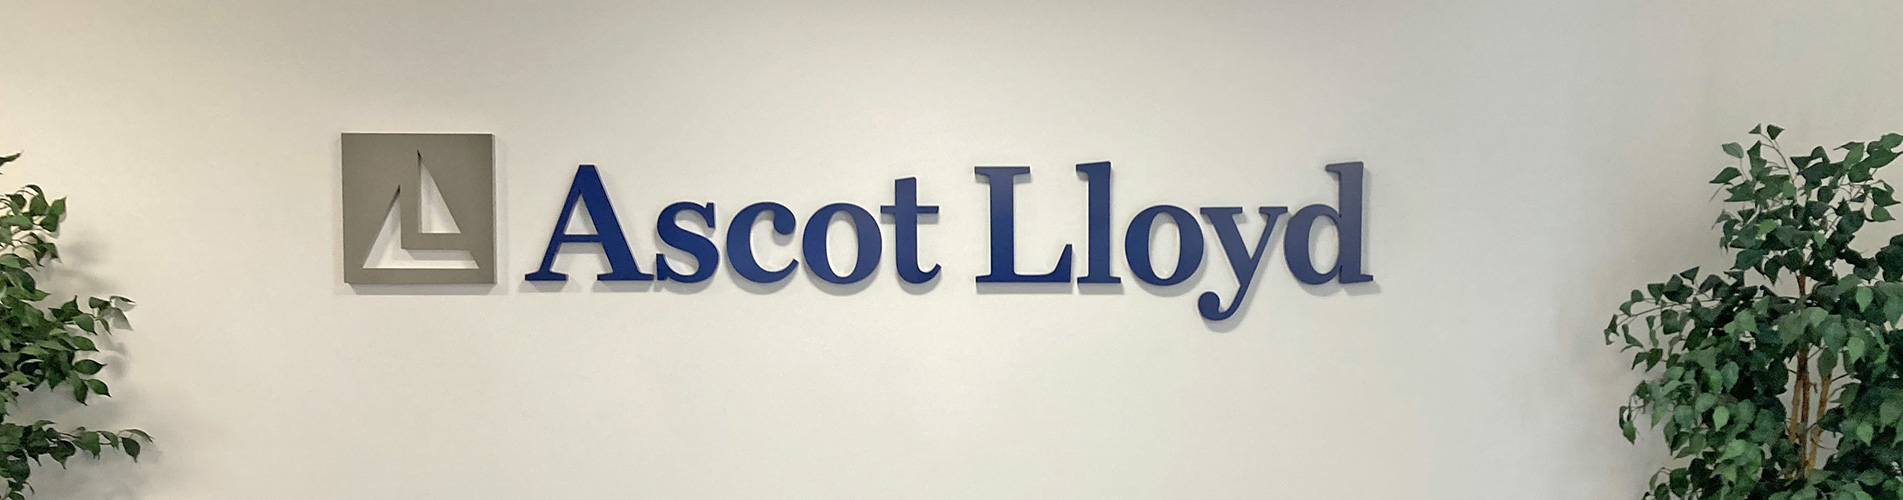 Ascot Lloyd website acceptable use policy